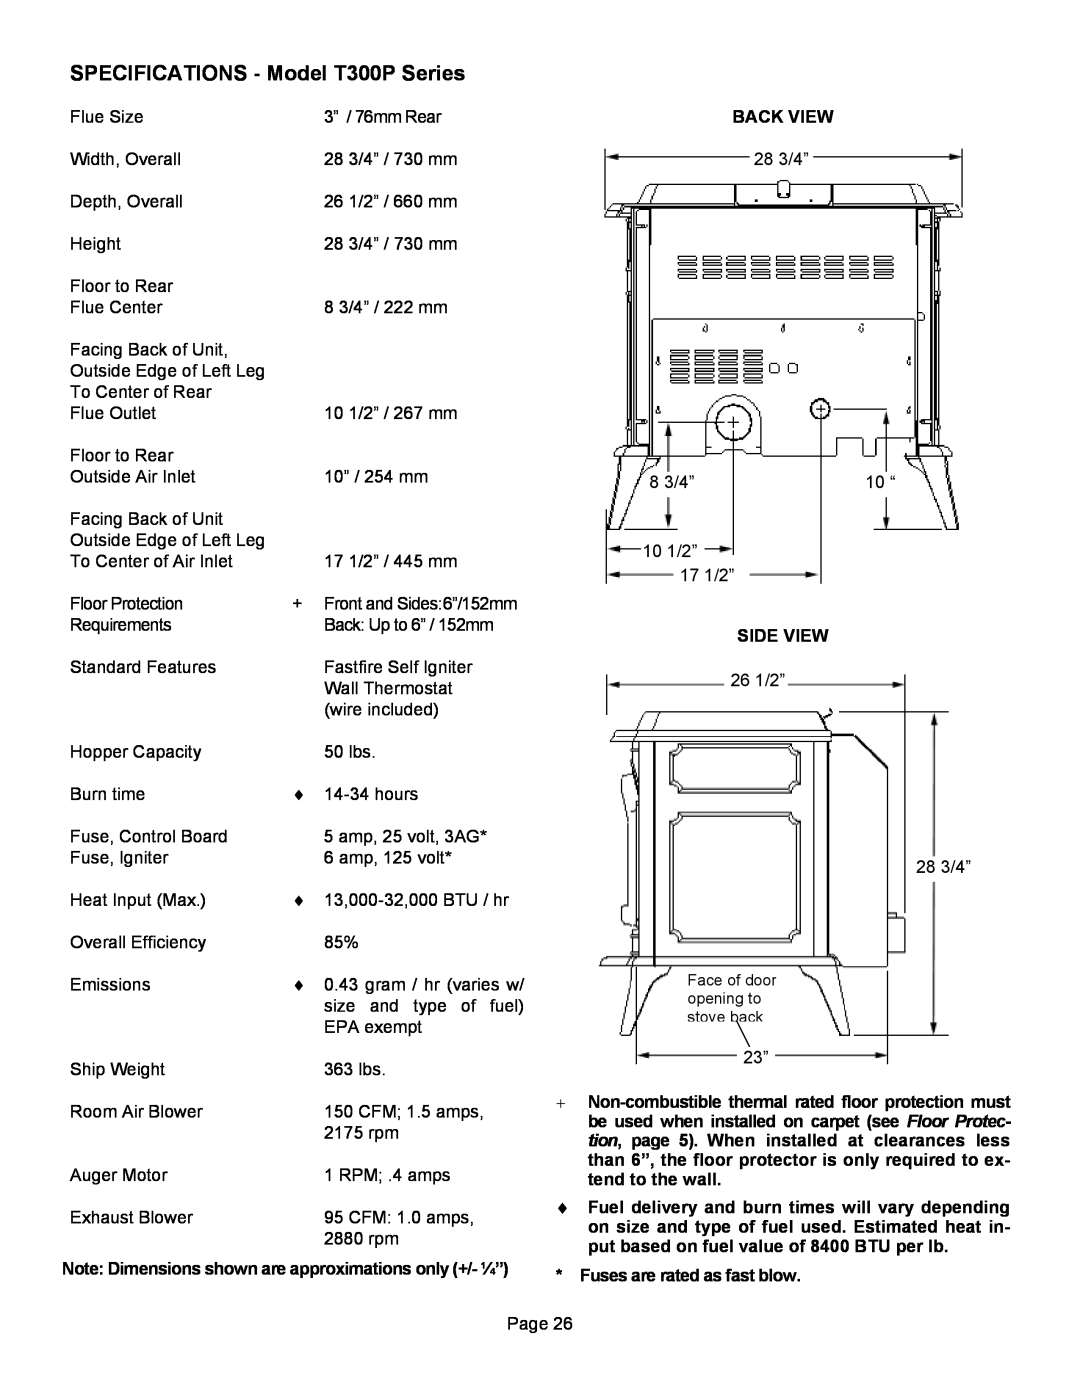 Lennox Hearth operation manual SPECIFICATIONS - Model T300P Series 